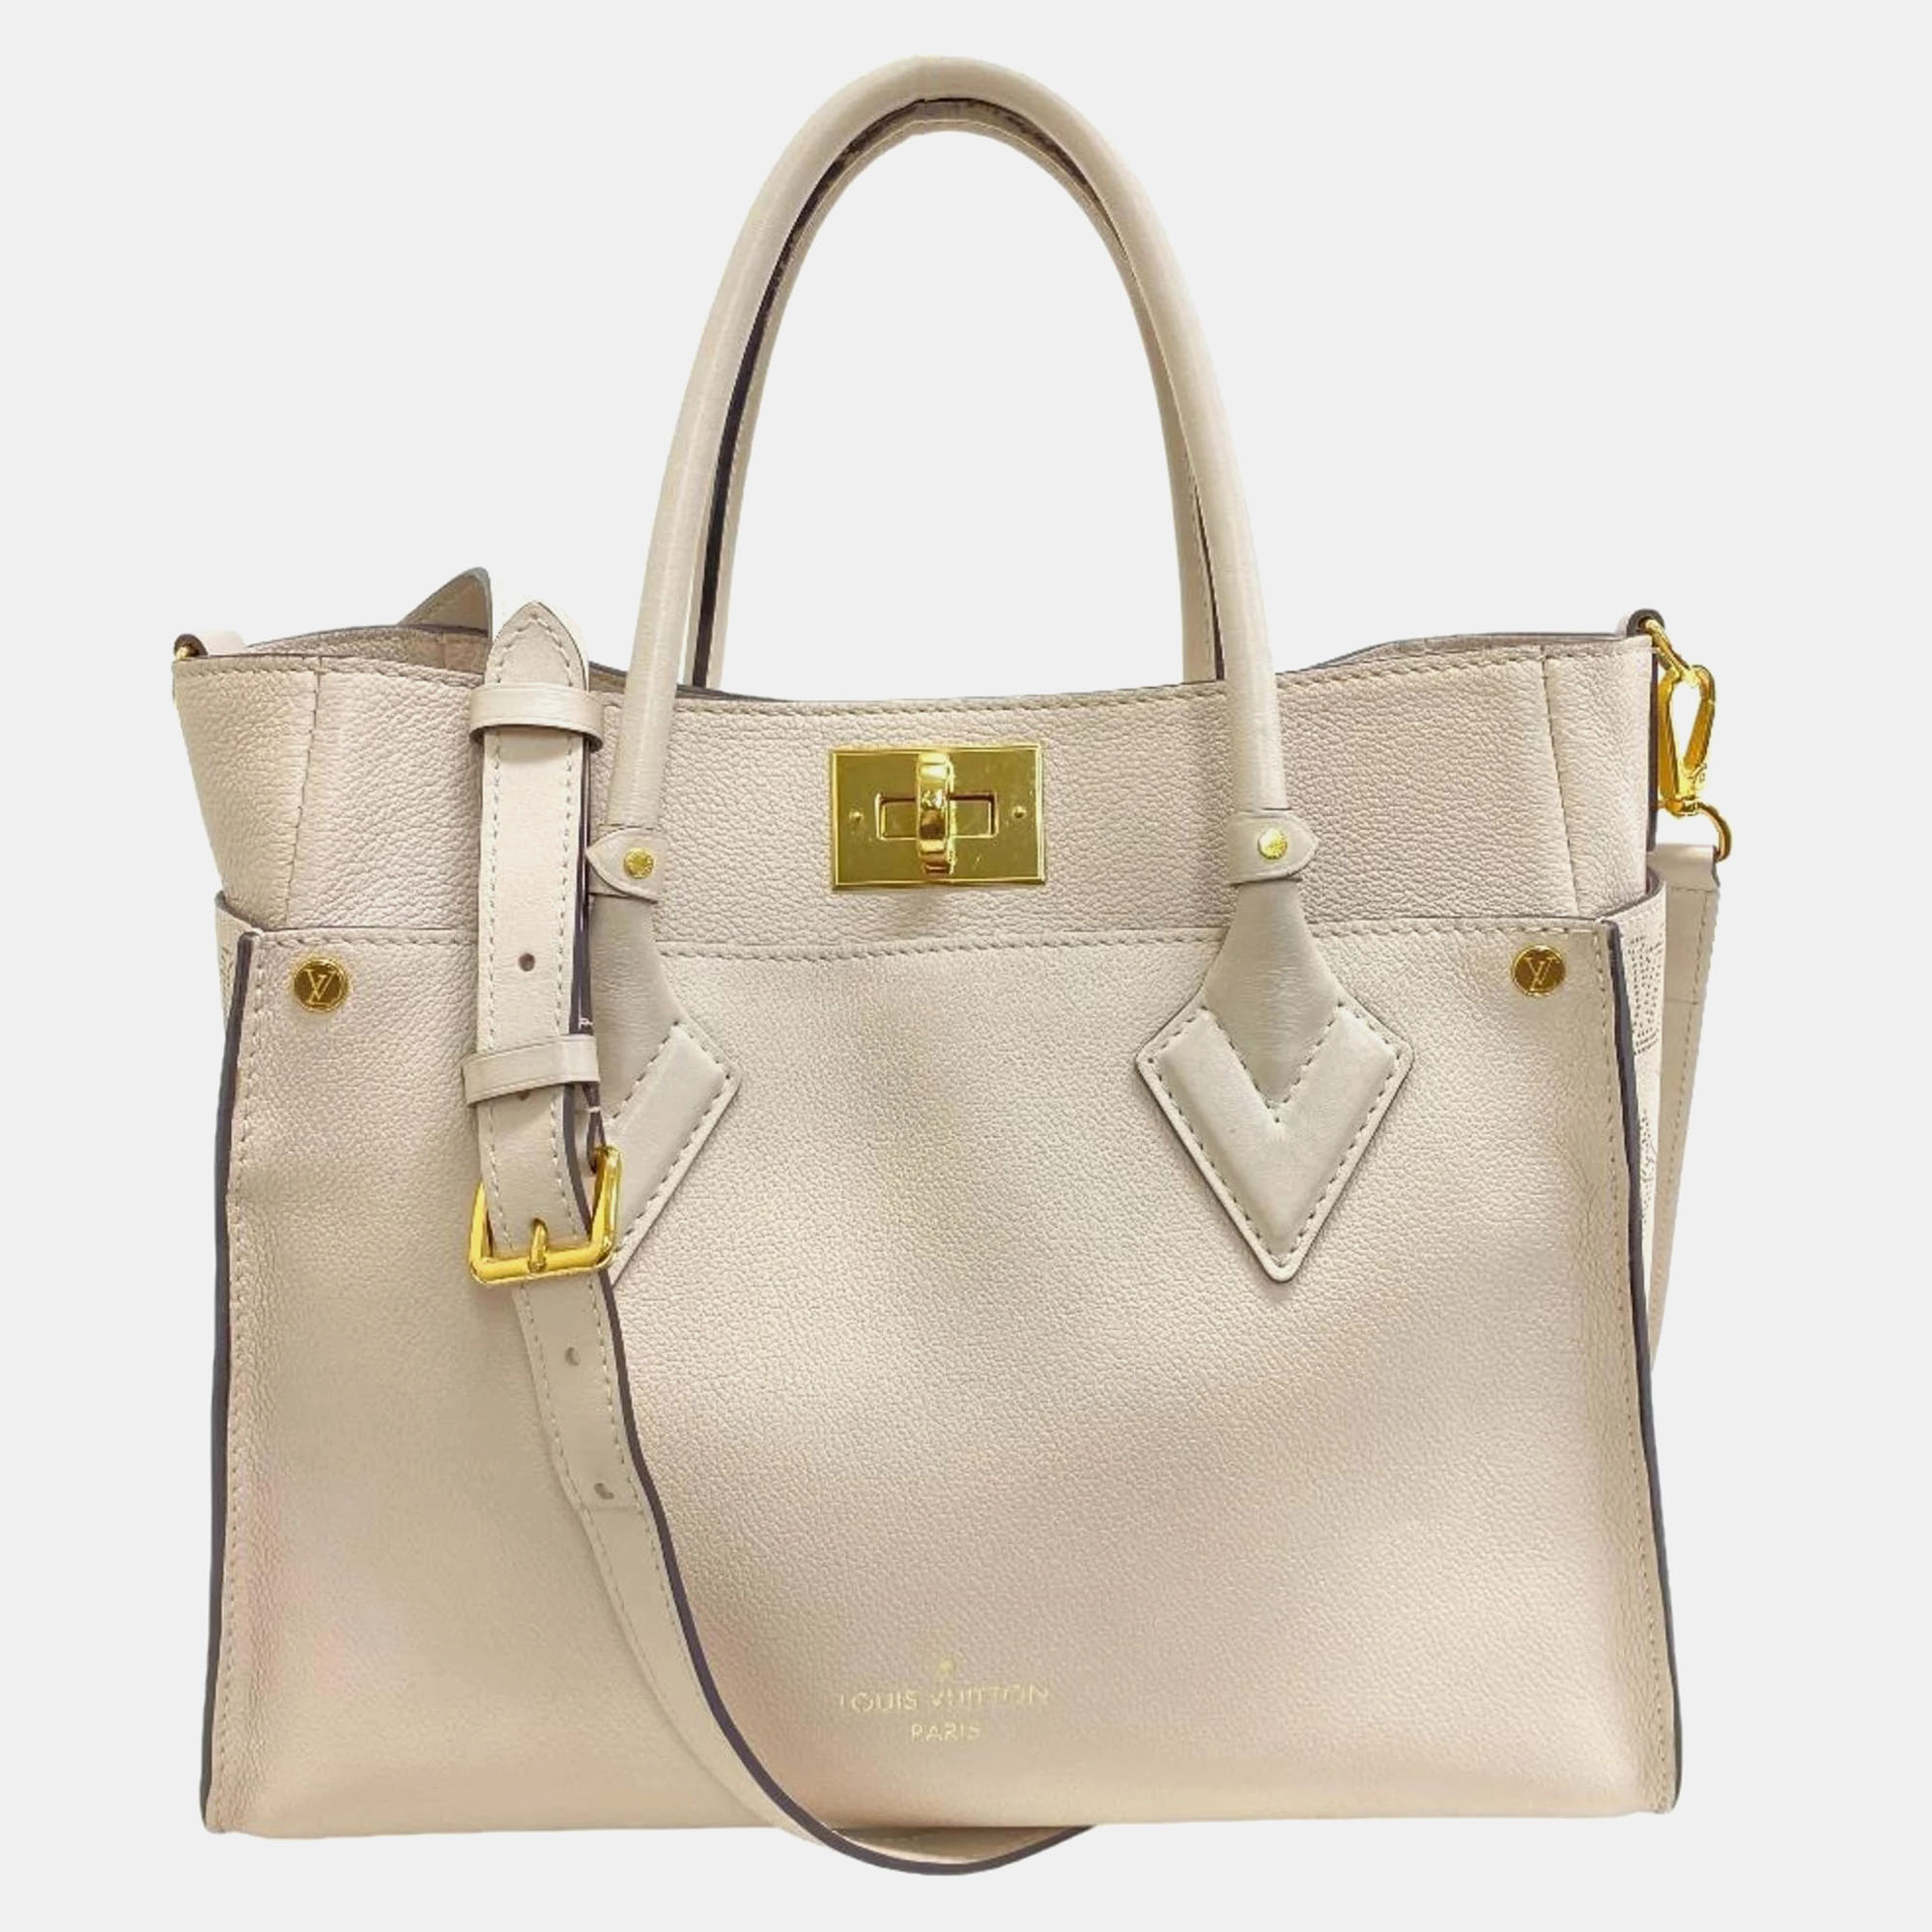 Louis vuitton  beige leather mahina on my side tote bag